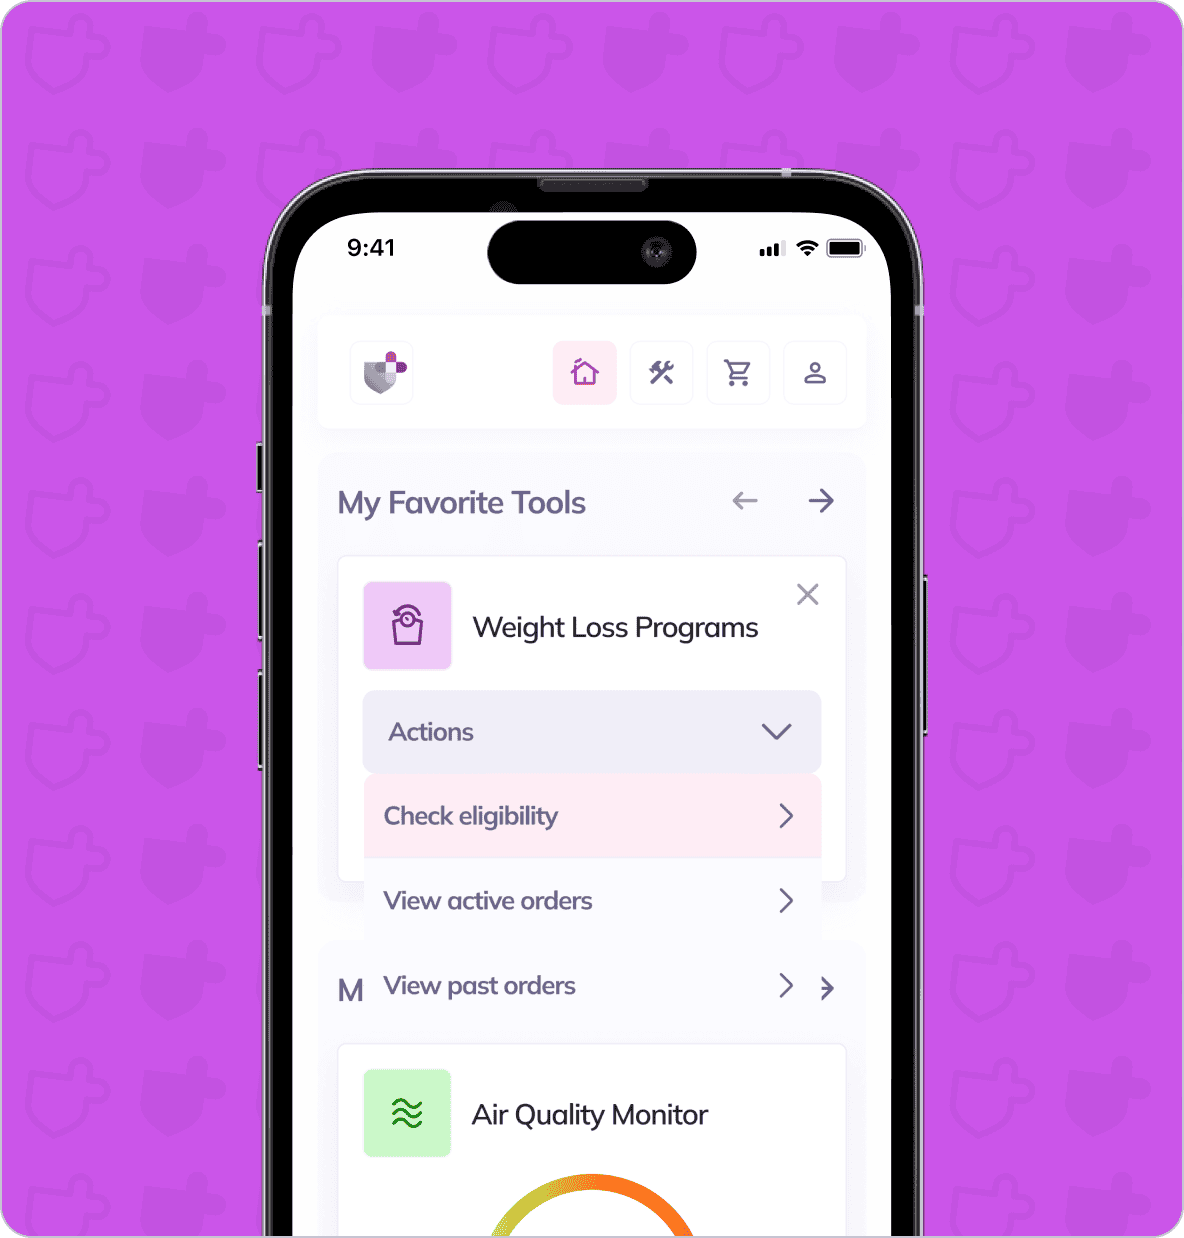 A smartphone screen displaying a health app interface. "My Favorite Tools" section includes options for "Weight Loss Programs" and "Air Quality Monitor" against a purple background with shield icons.